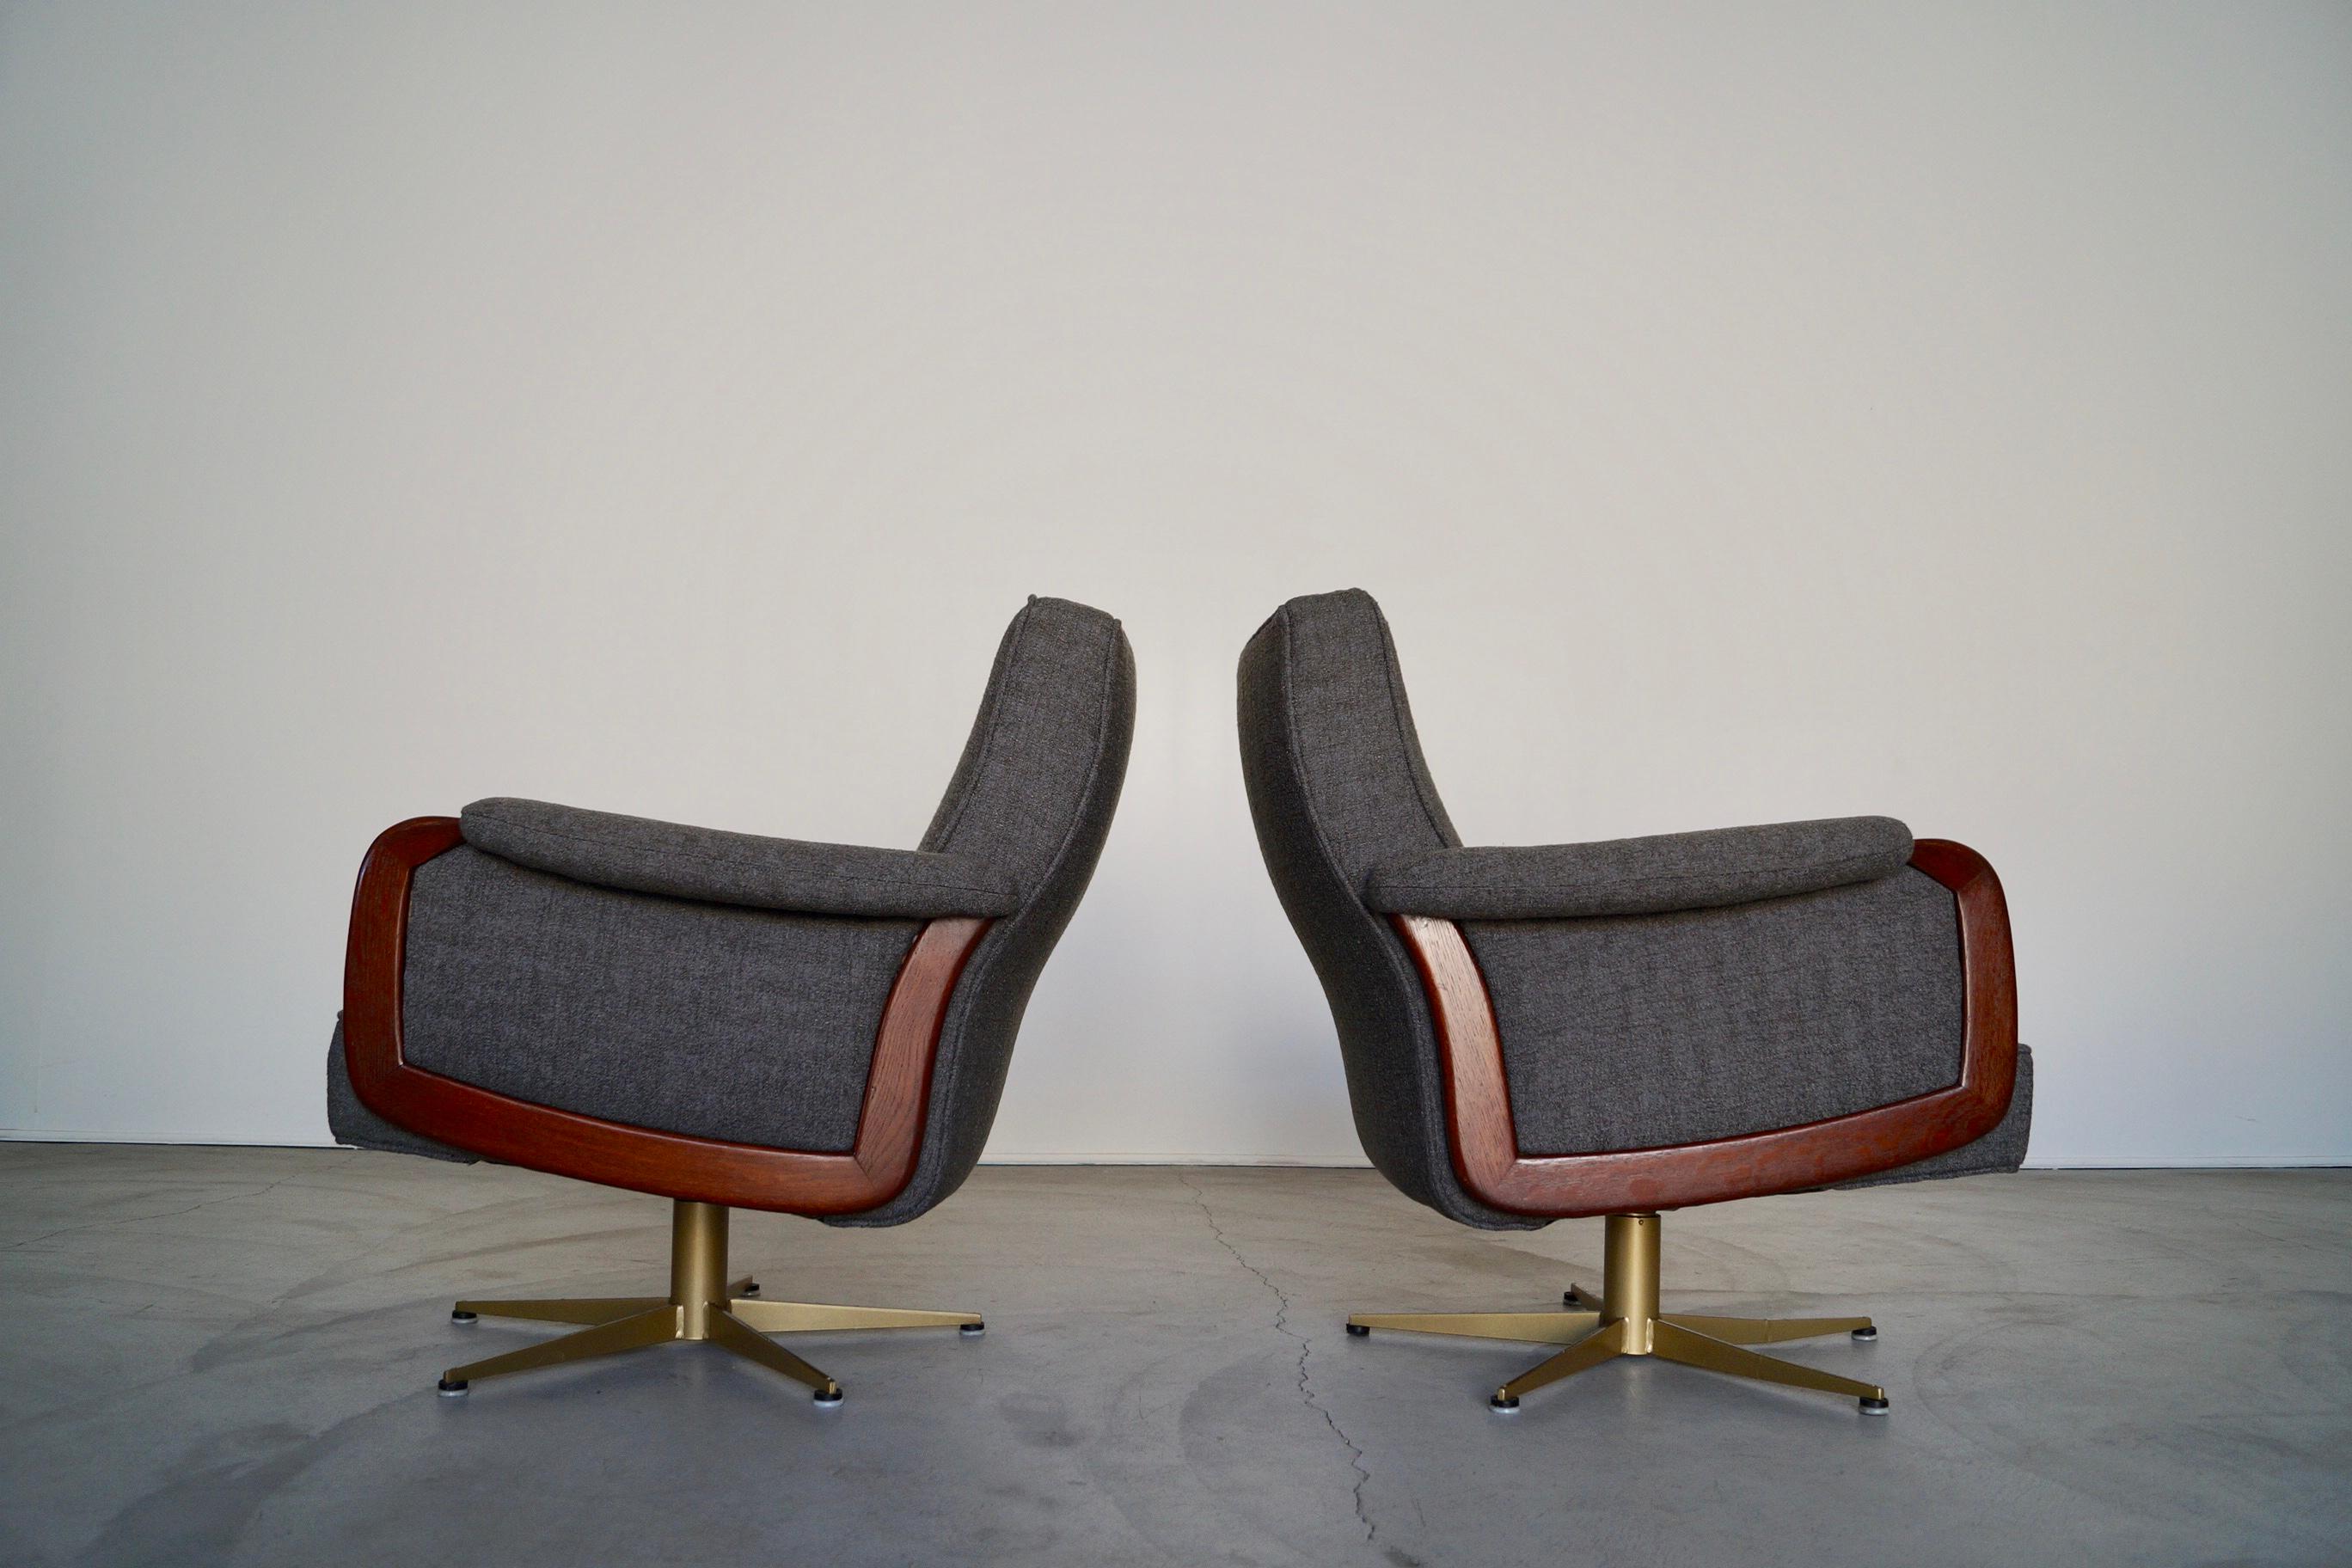 Metal 1970's Mid-Century Modern Swivel Lounge Chairs - a Pair For Sale